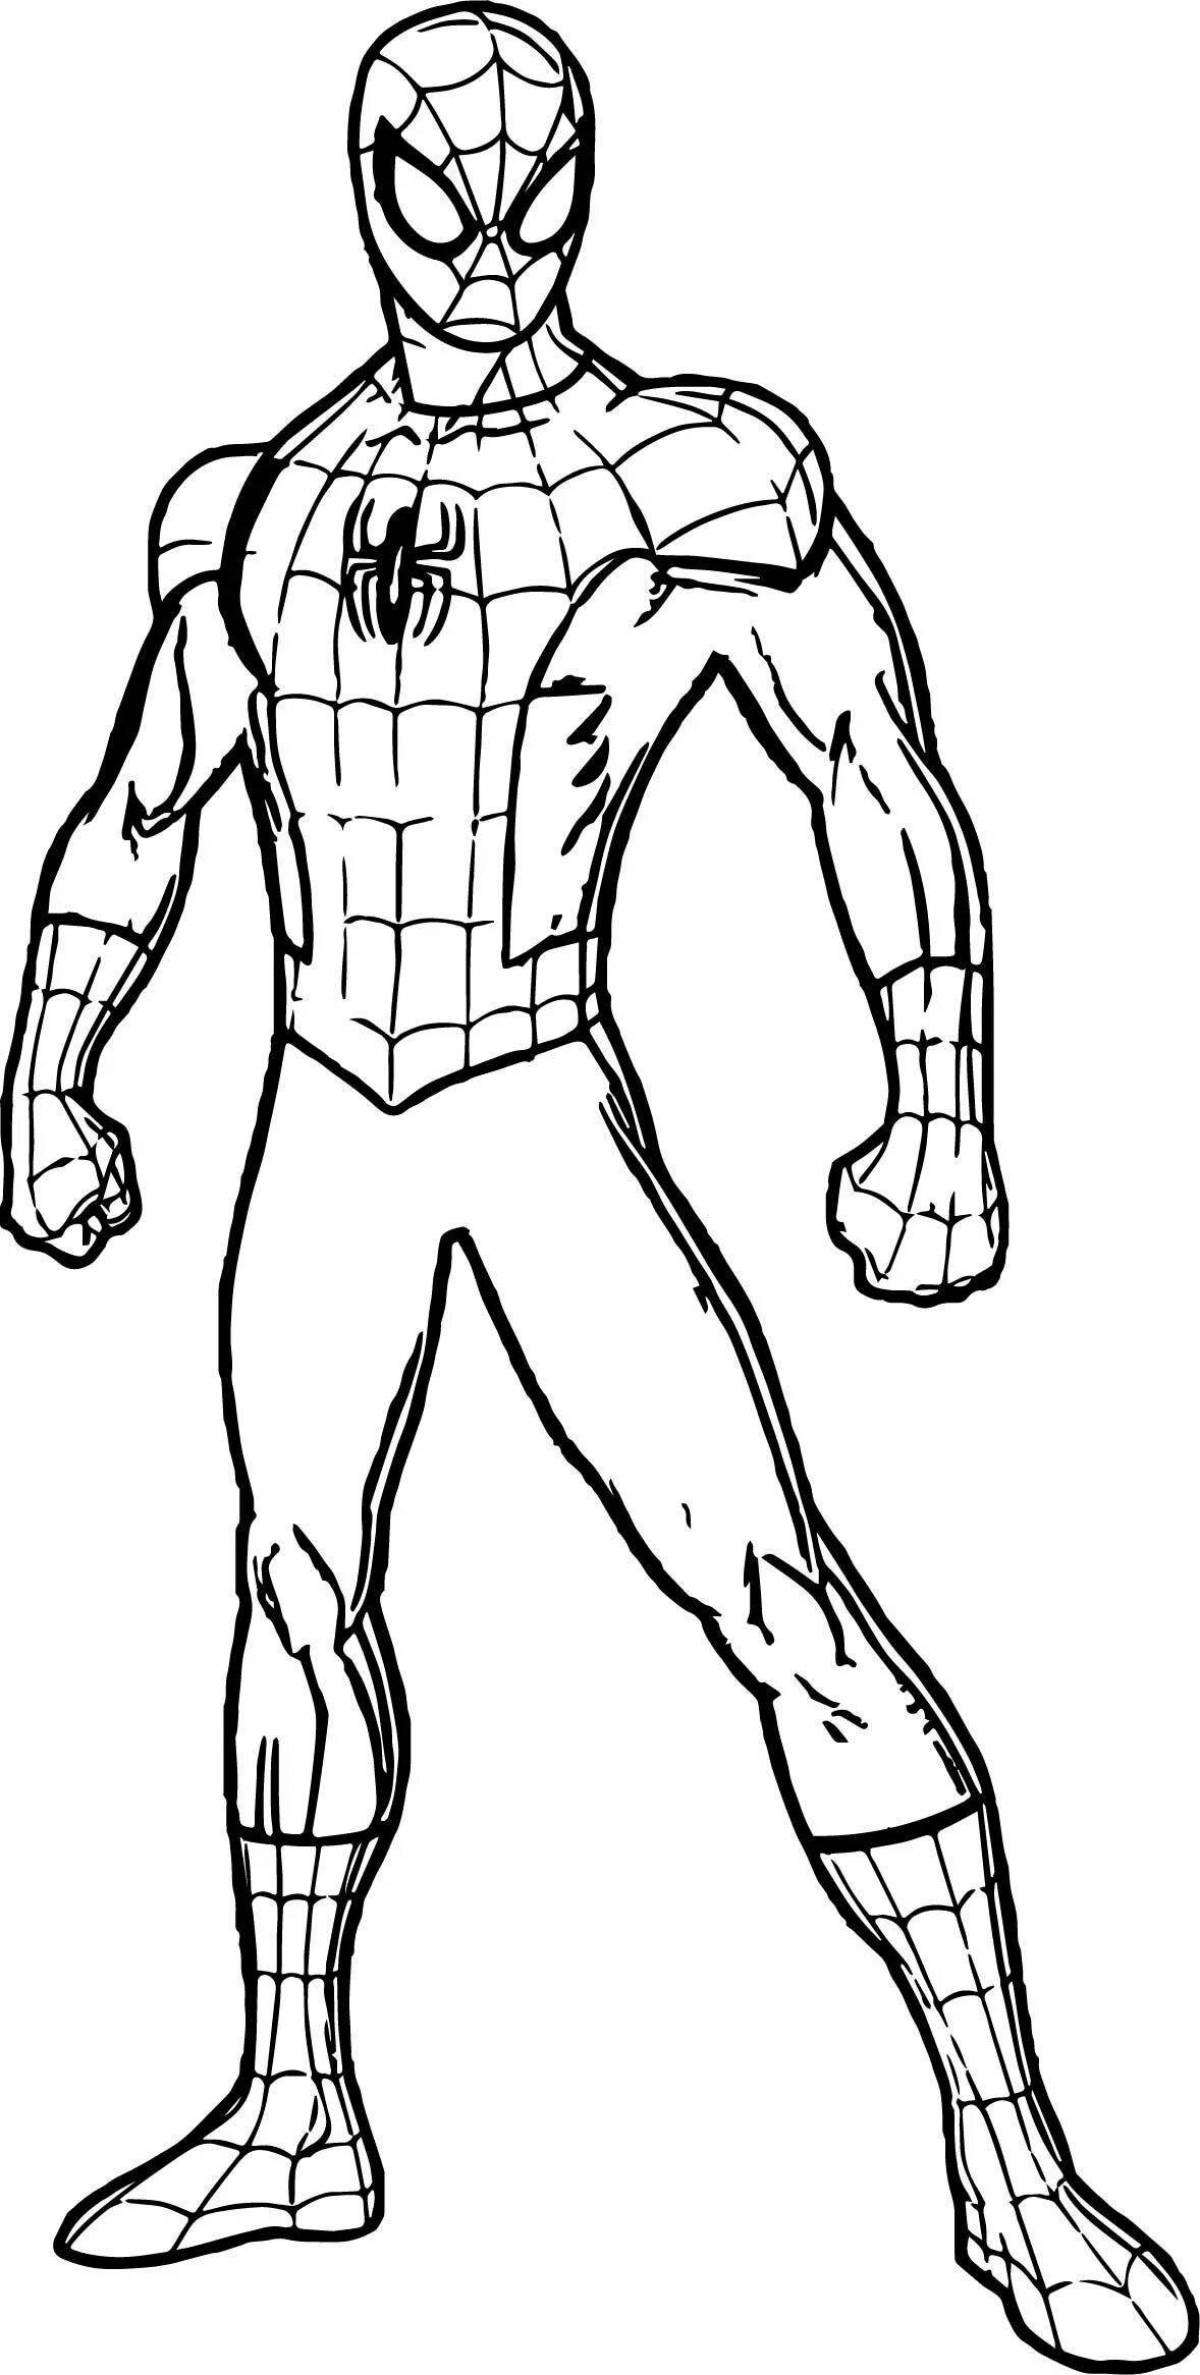 Spider-man creative coloring book for kids